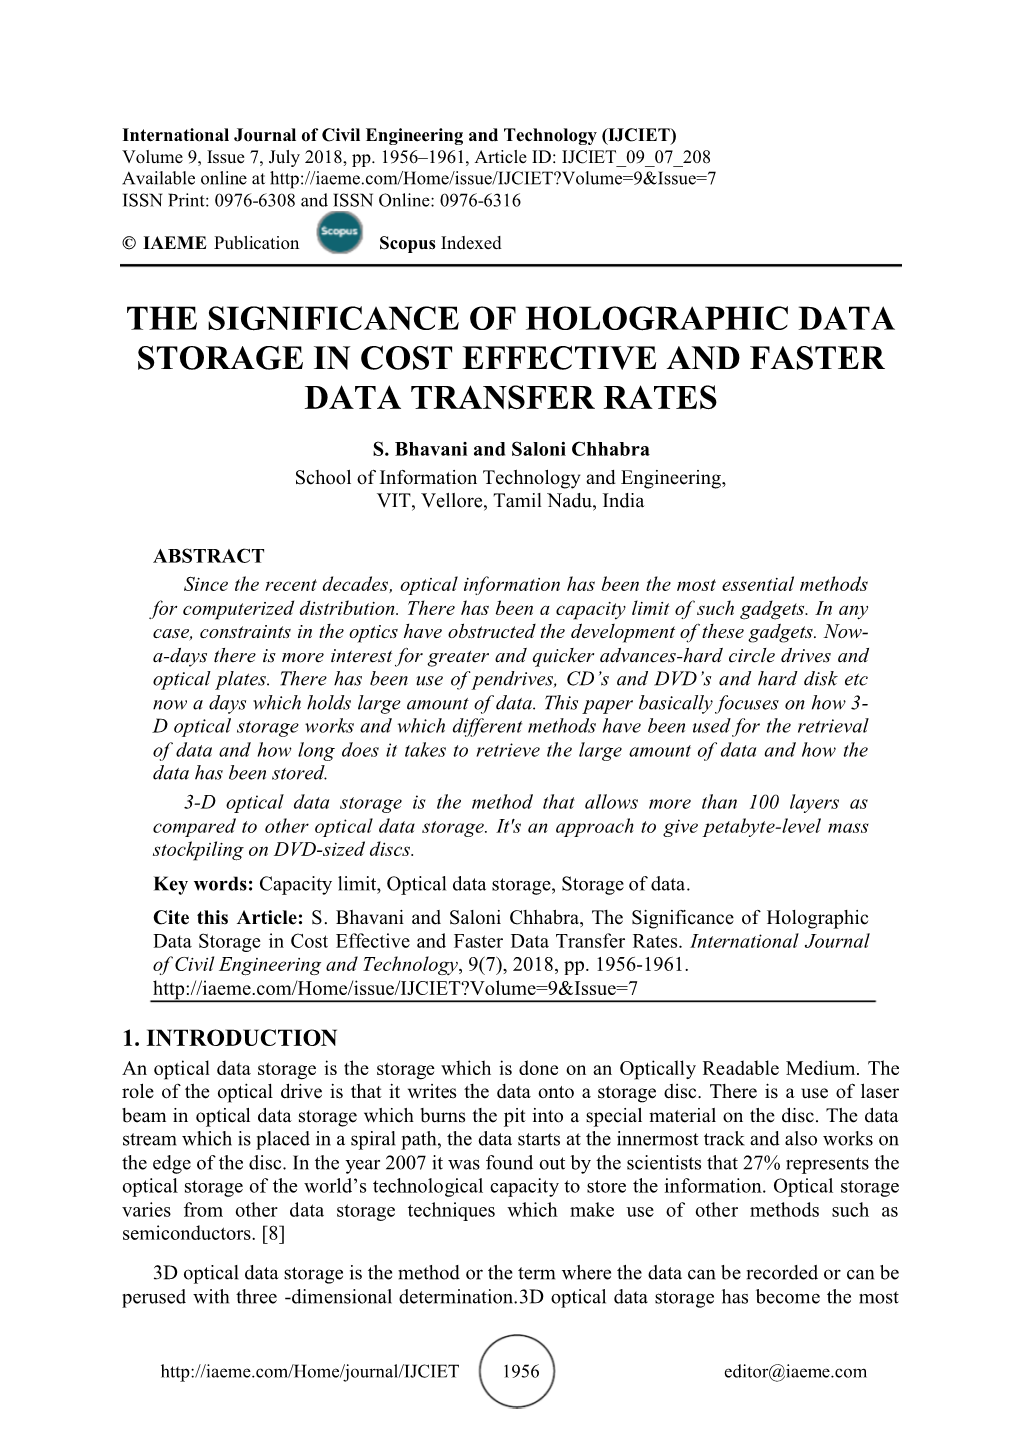 The Significance of Holographic Data Storage in Cost Effective and Faster Data Transfer Rates